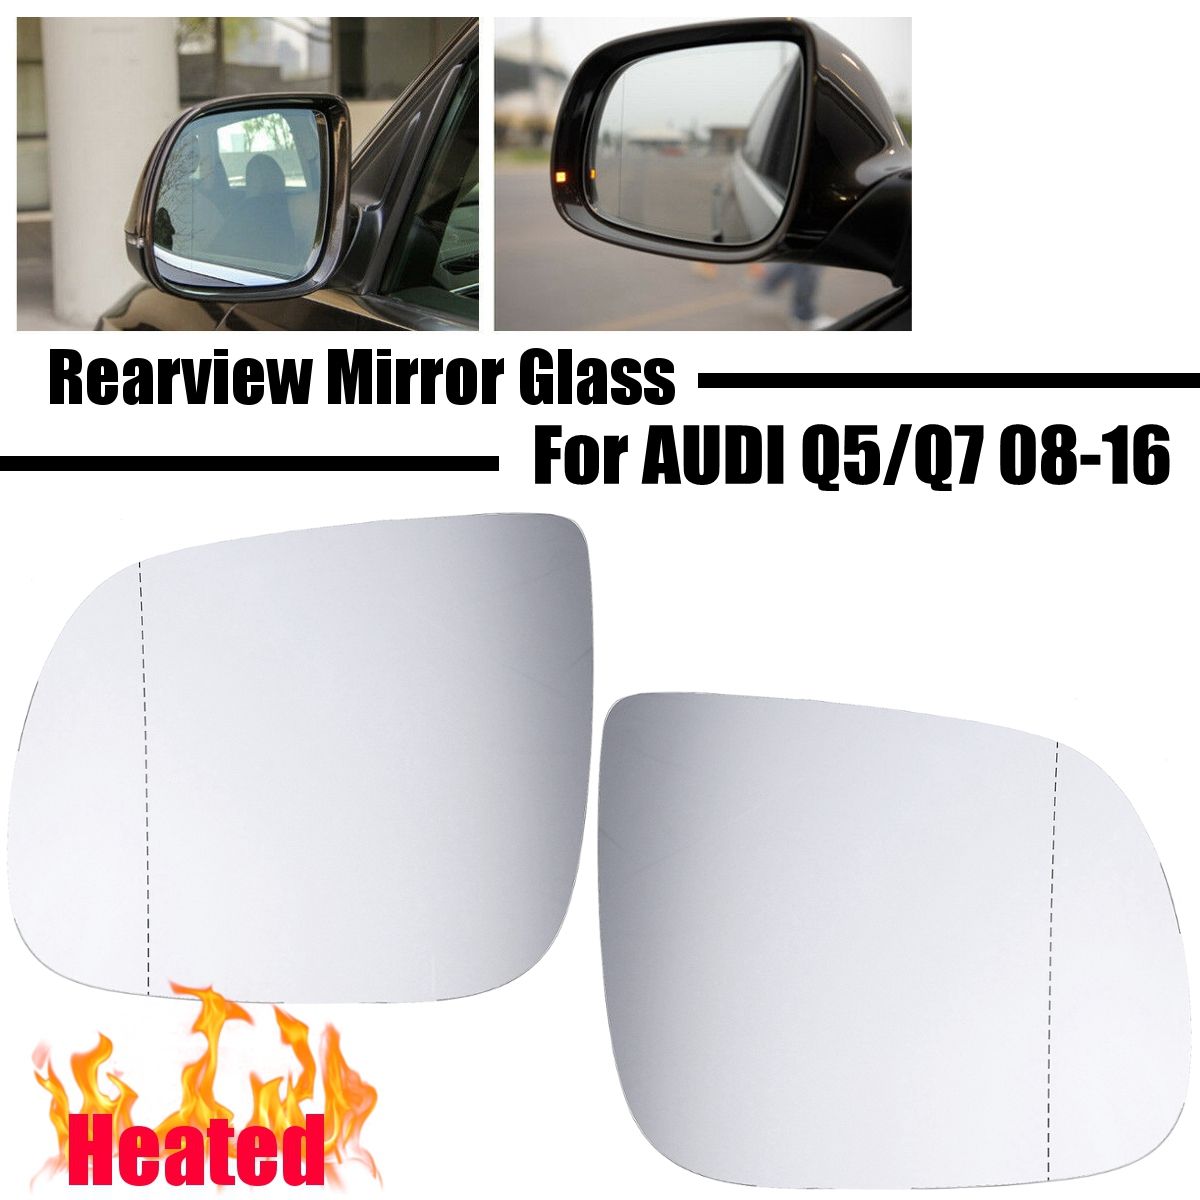 LeftRight-Antifog-Heated-Rearview-Mirror-Glass-For-Audi-Q5-Q7-2008-2016-1688354